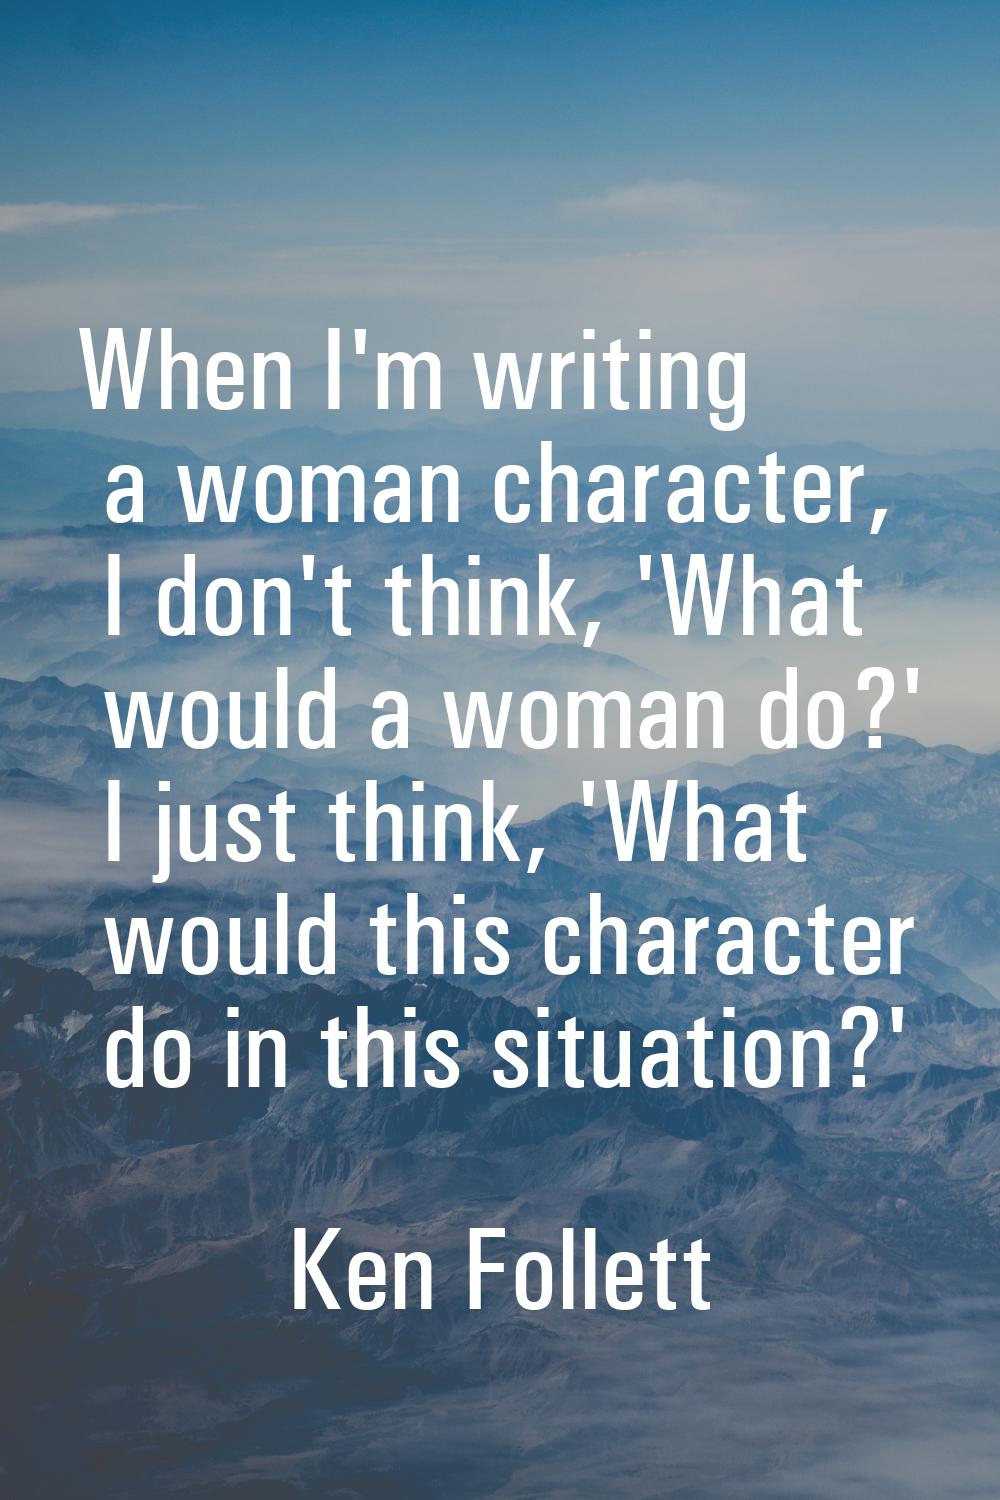 When I'm writing a woman character, I don't think, 'What would a woman do?' I just think, 'What wou